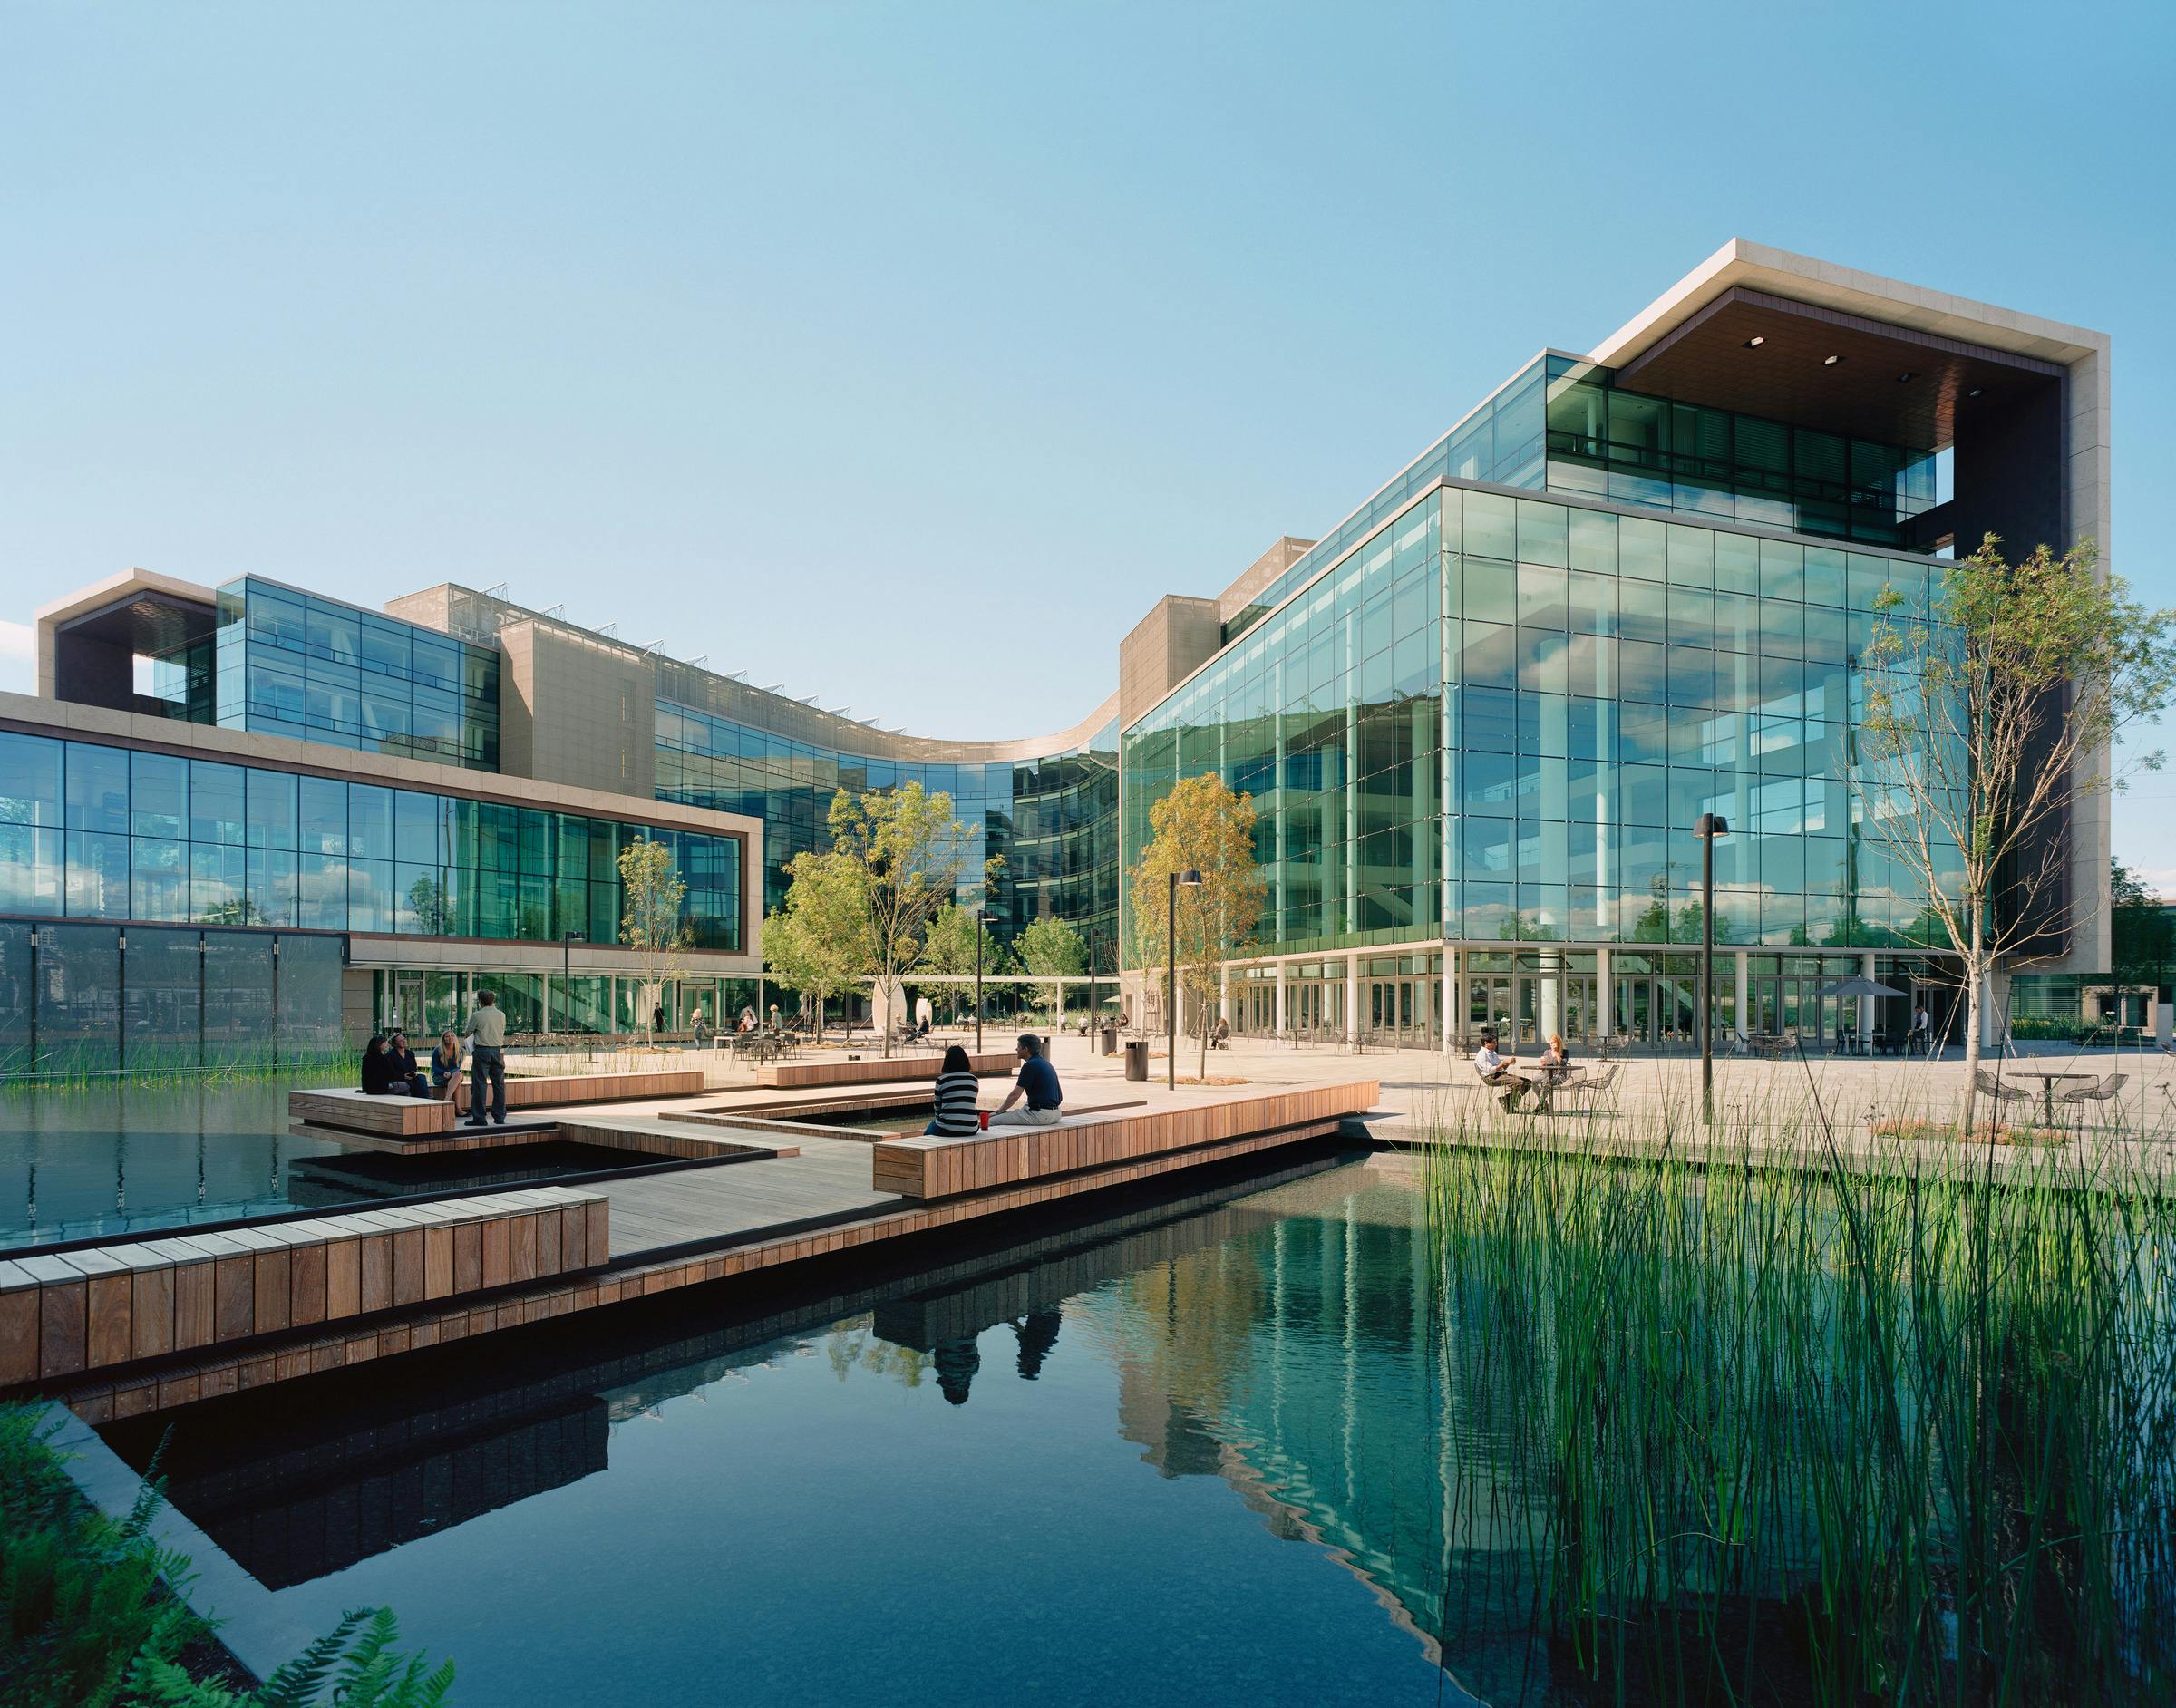 View of the Bill & Melinda Gates Foundation Seattle Campus.